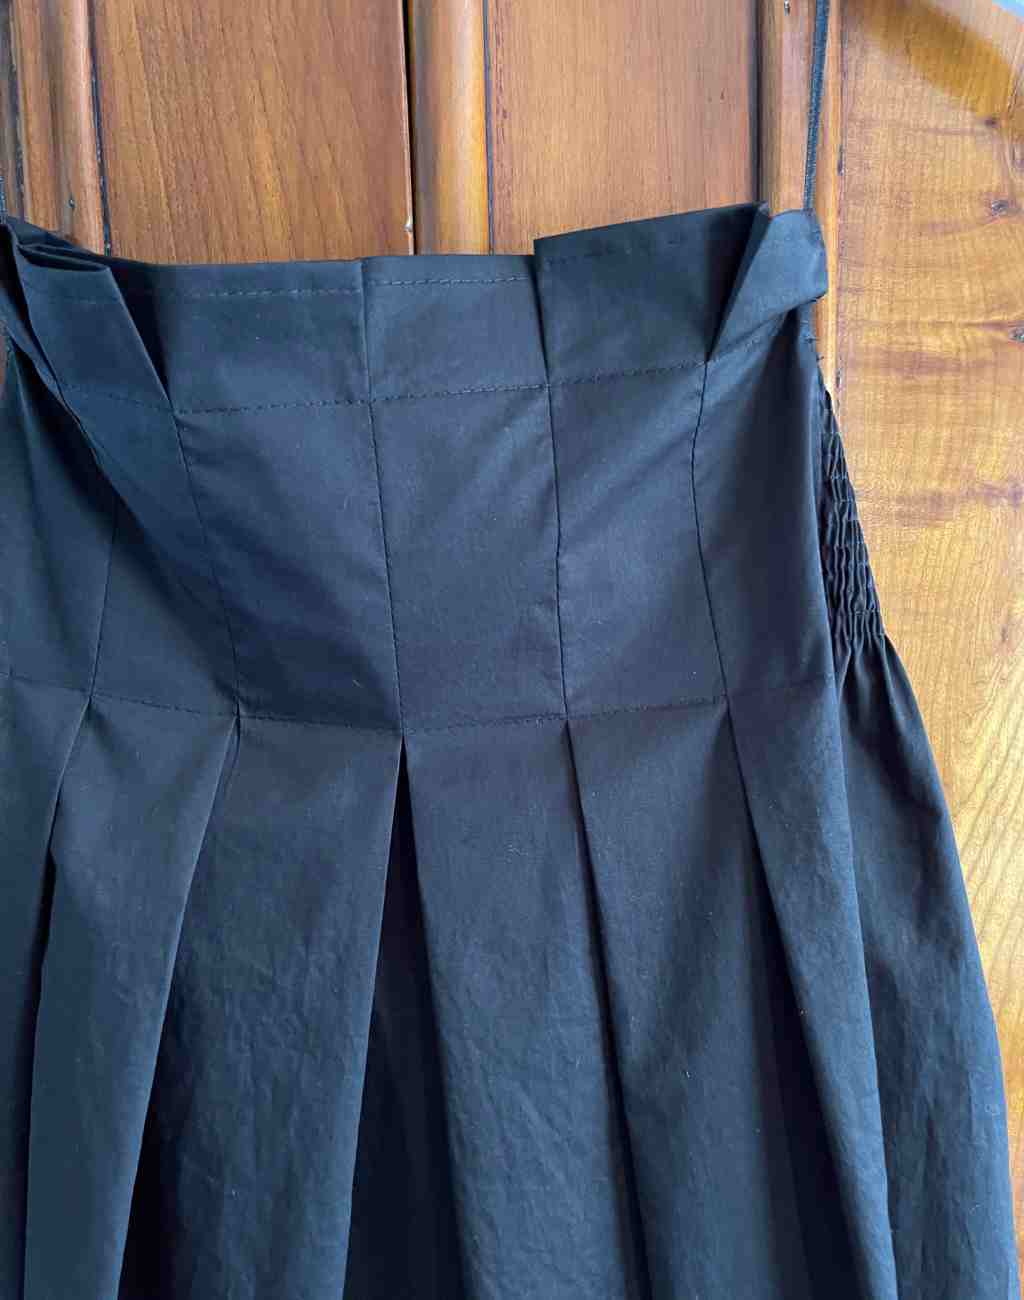 Precious Black Charlotte Skirt with Smocked Back and Pleated Front - Visit Nifty Monica Nera 